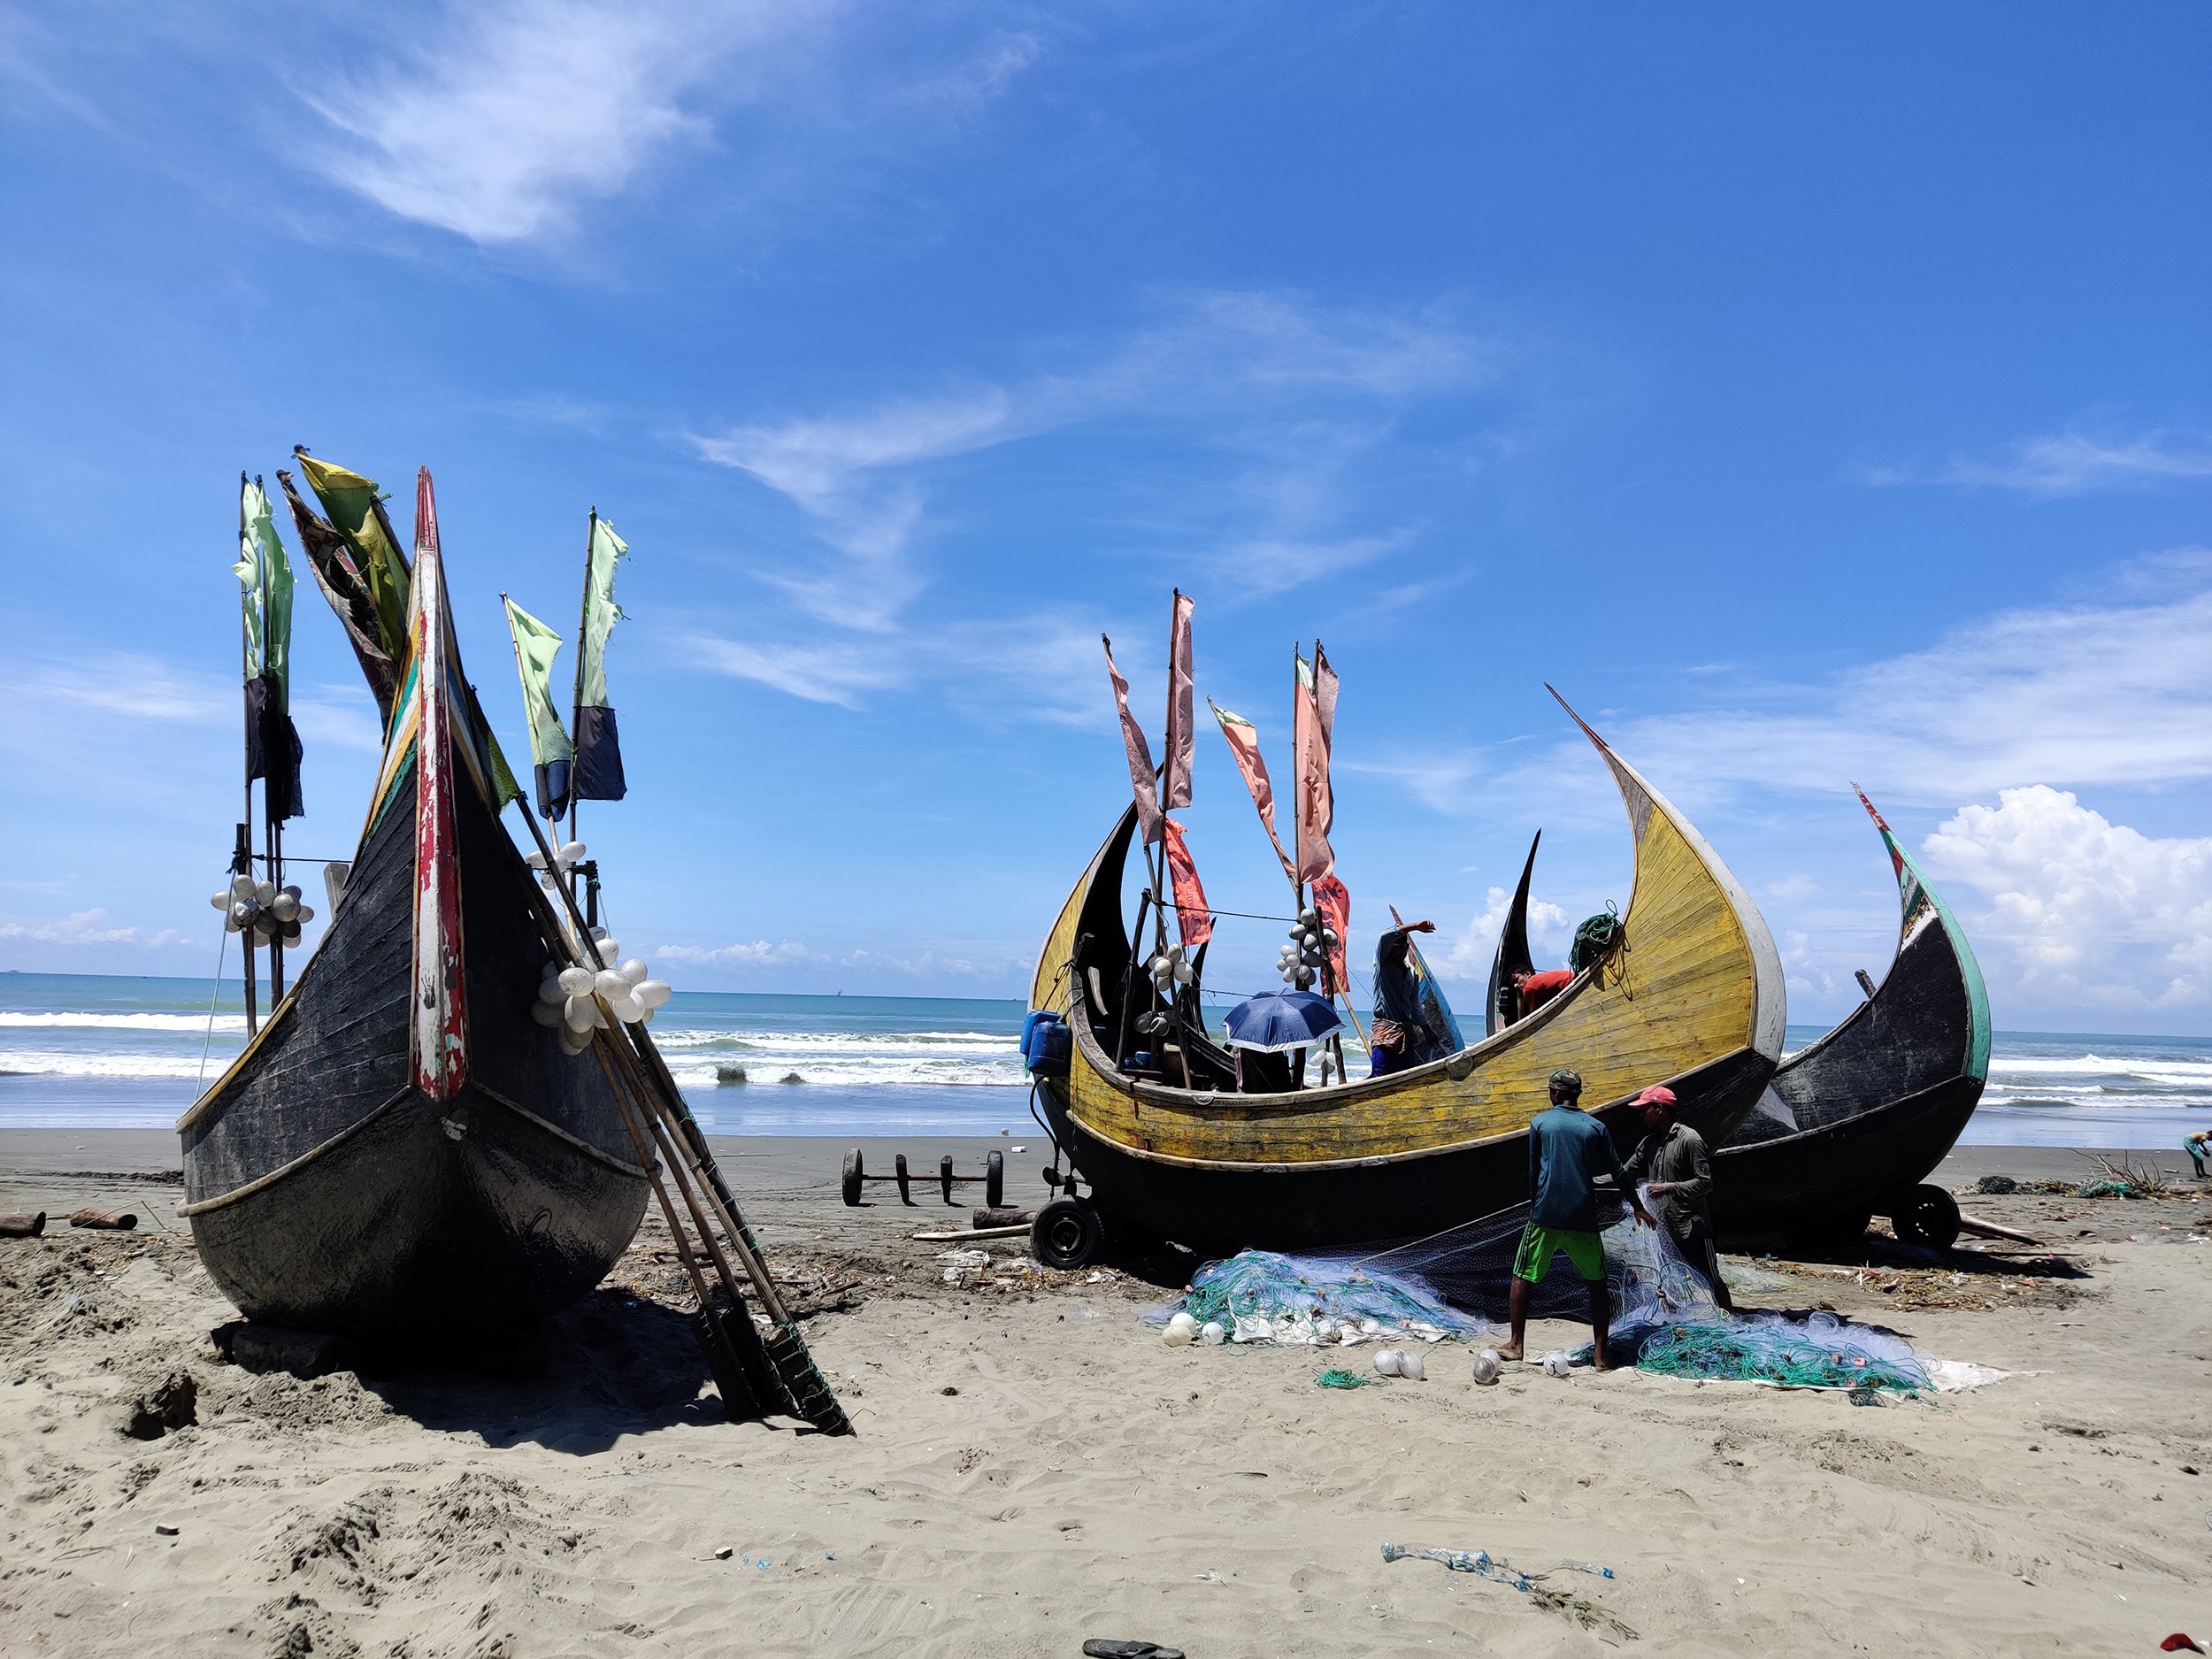 In the southeastern corner of Bangladesh, boats lined up at the Holbonia fishing harbour, notorious as the starting point of illegal voyages to Malaysia by trafficked Rohingya refugees [Image by: Nazmun Naher Shishir]